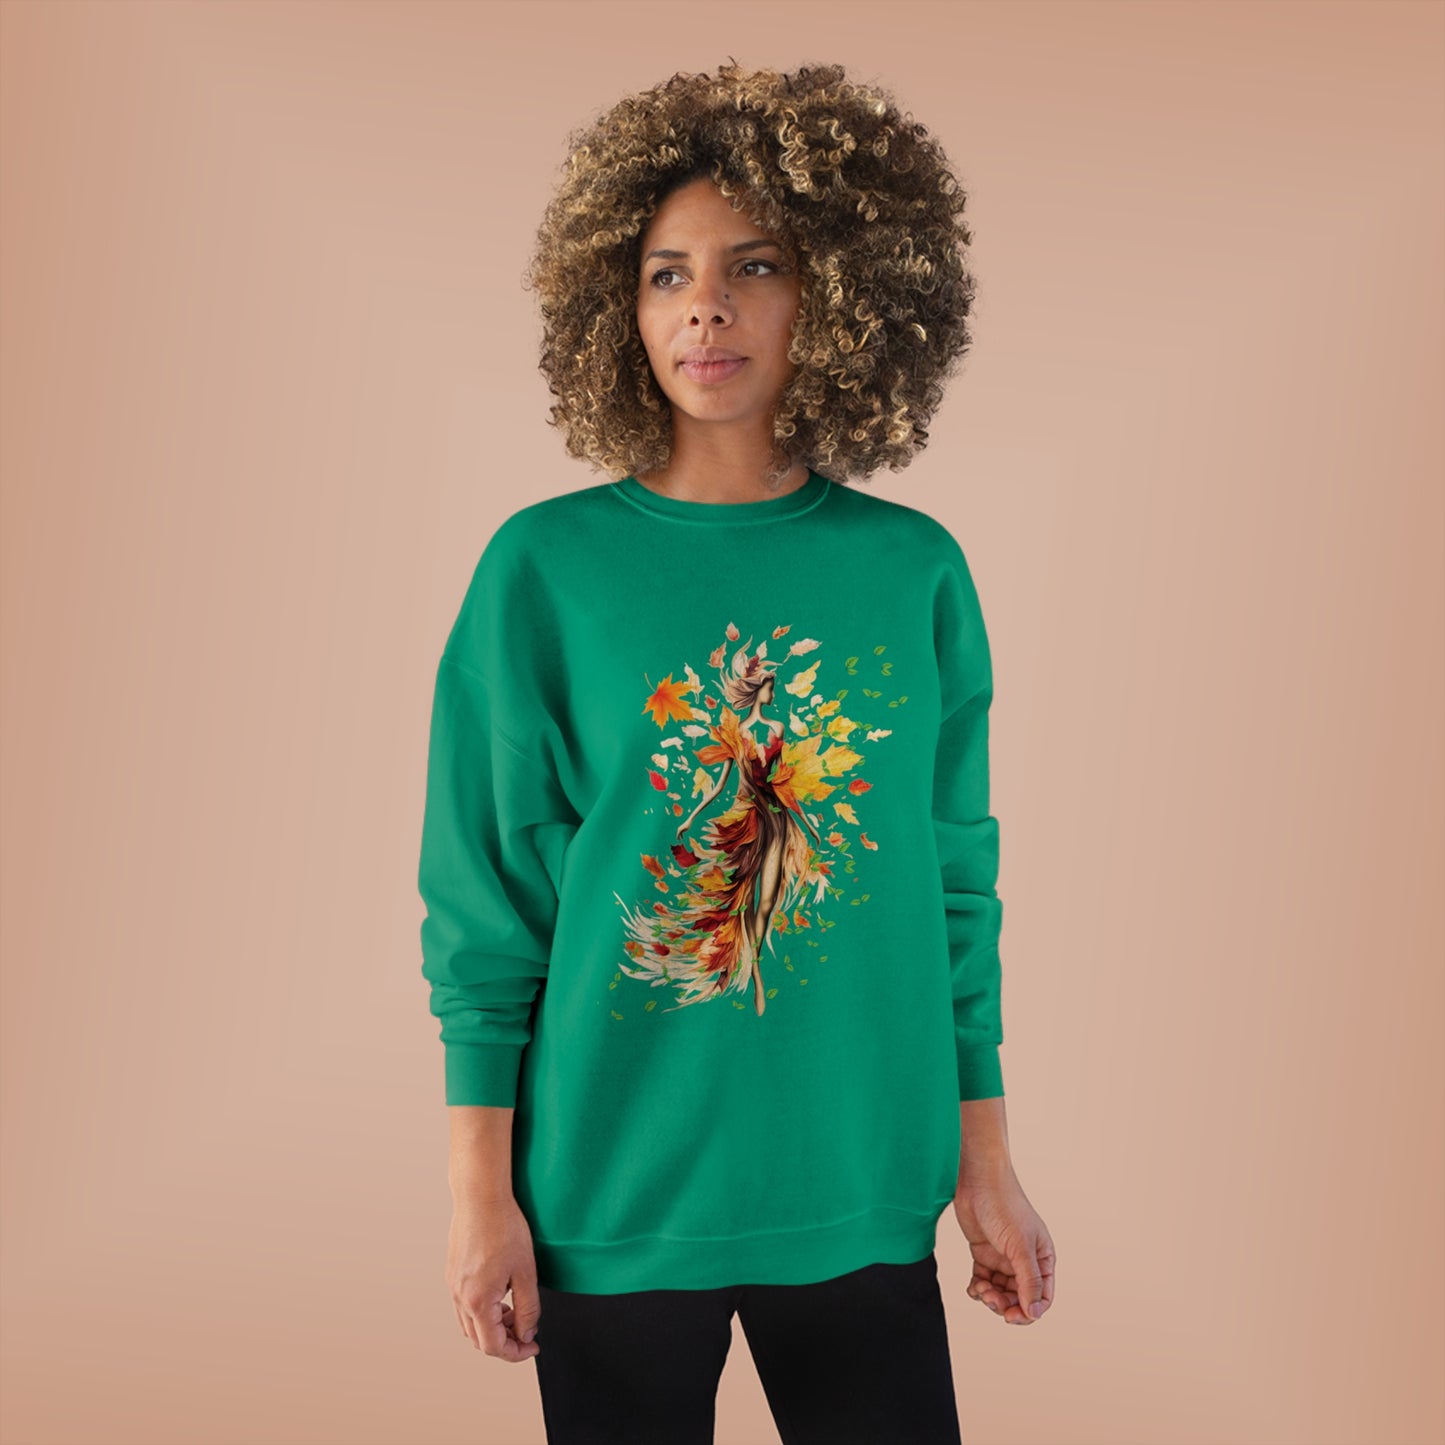 Whimsical Dreams in Autumn Hues: Romantic Dreamy Female Surrounded by Autumn Leaves Sweatshirt - Fairycore, Forestcore, Cottagecore-inspired Fashion Sweatshirt Kelly Green S 